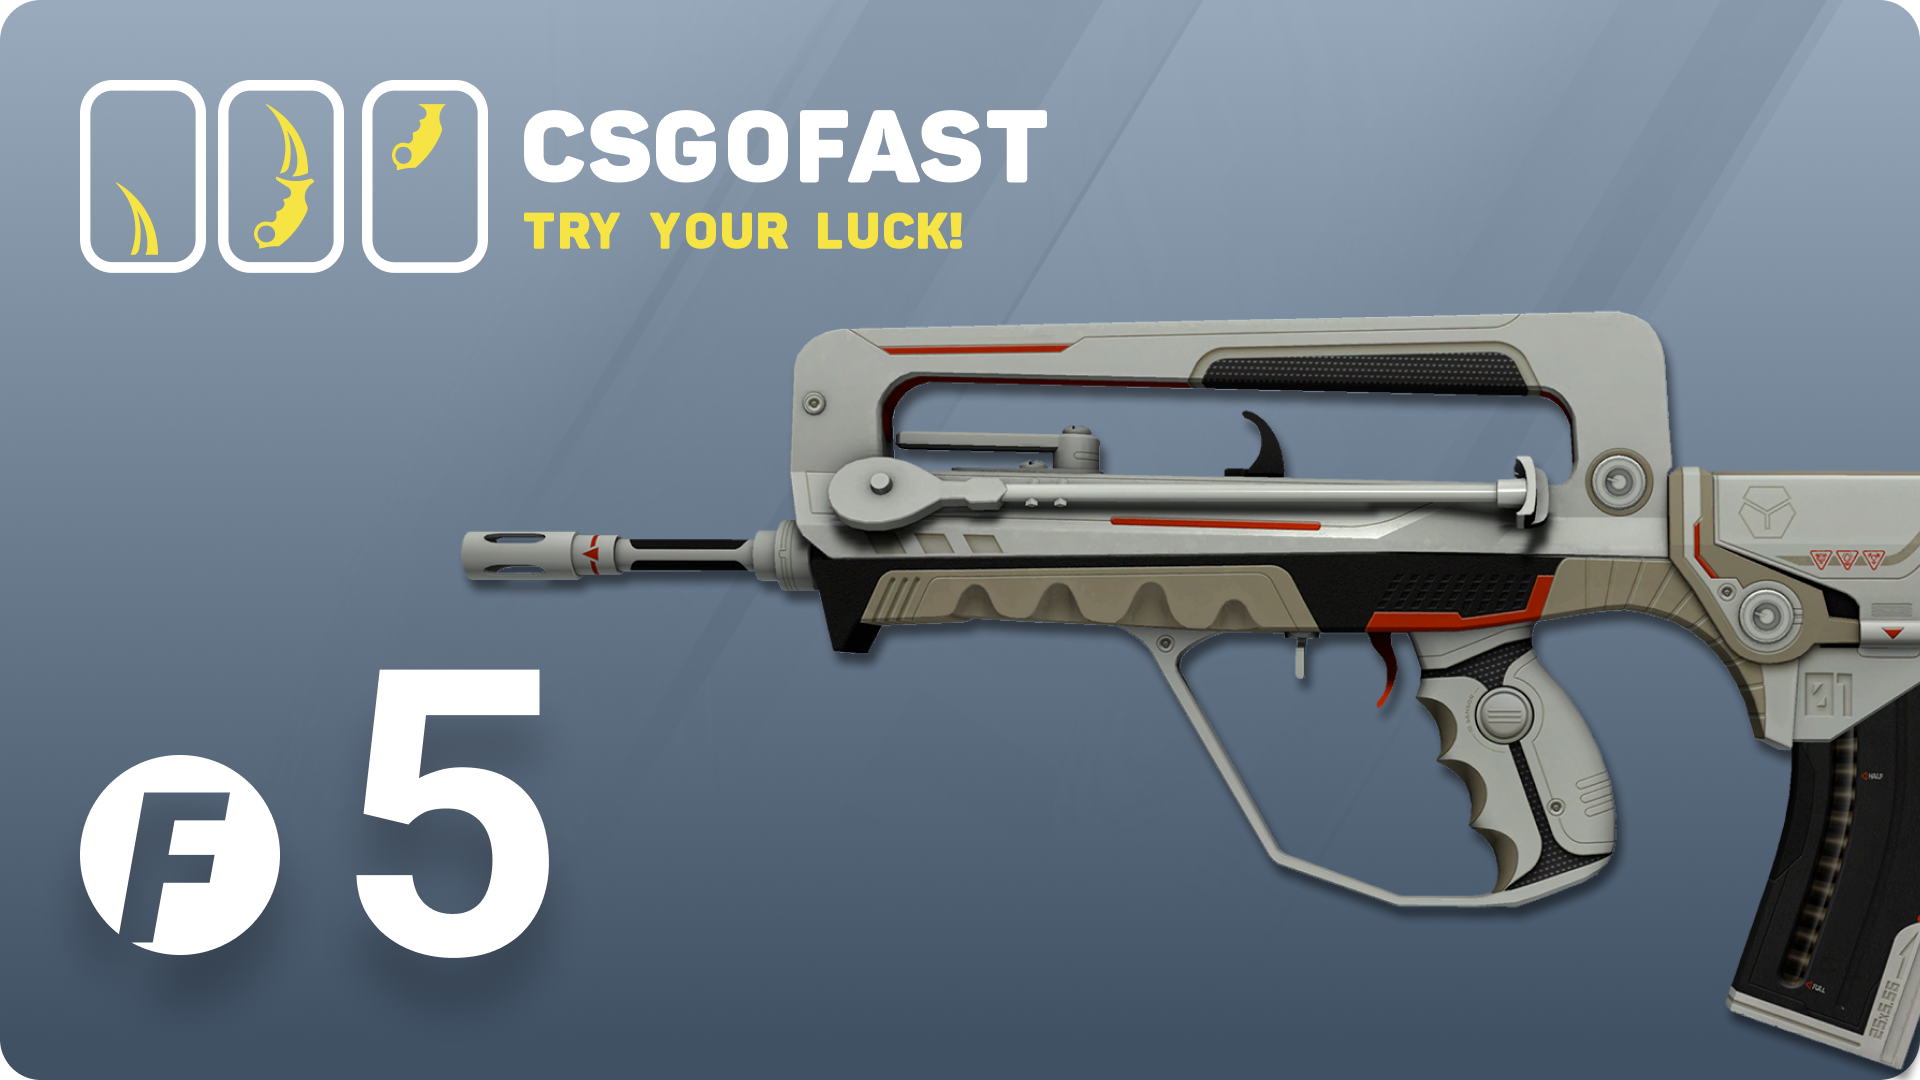 CSGOFAST 5 Fast Coins Gift Card, 3.63 usd